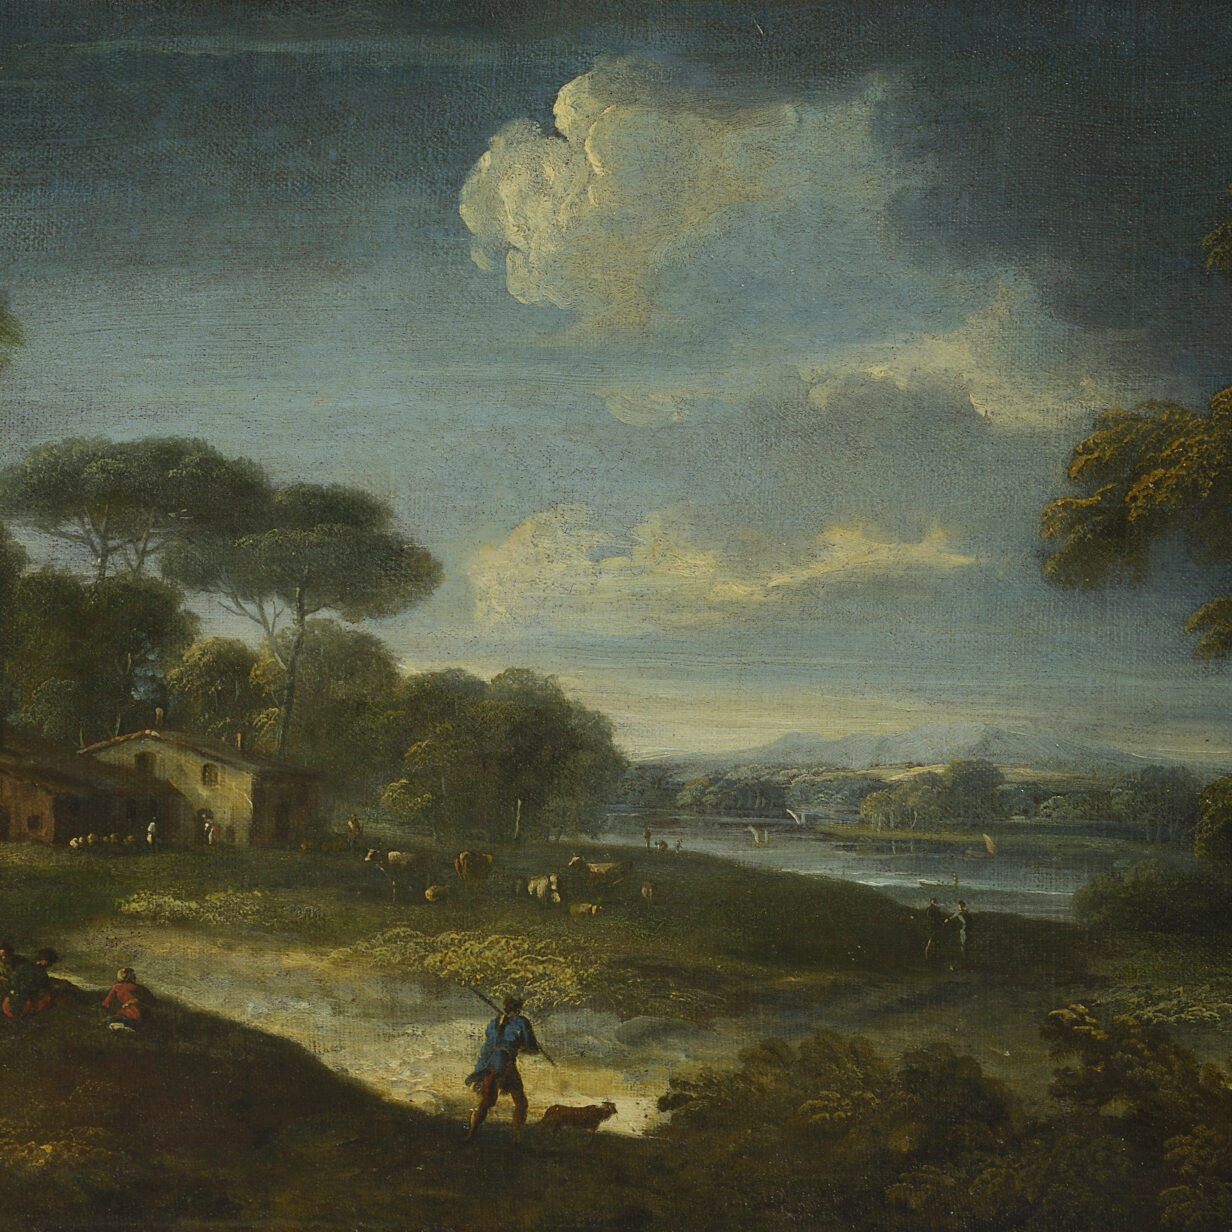 Follower of salvator rosa, an extensive pastoral landscape with lake, 18th century oil on canvas